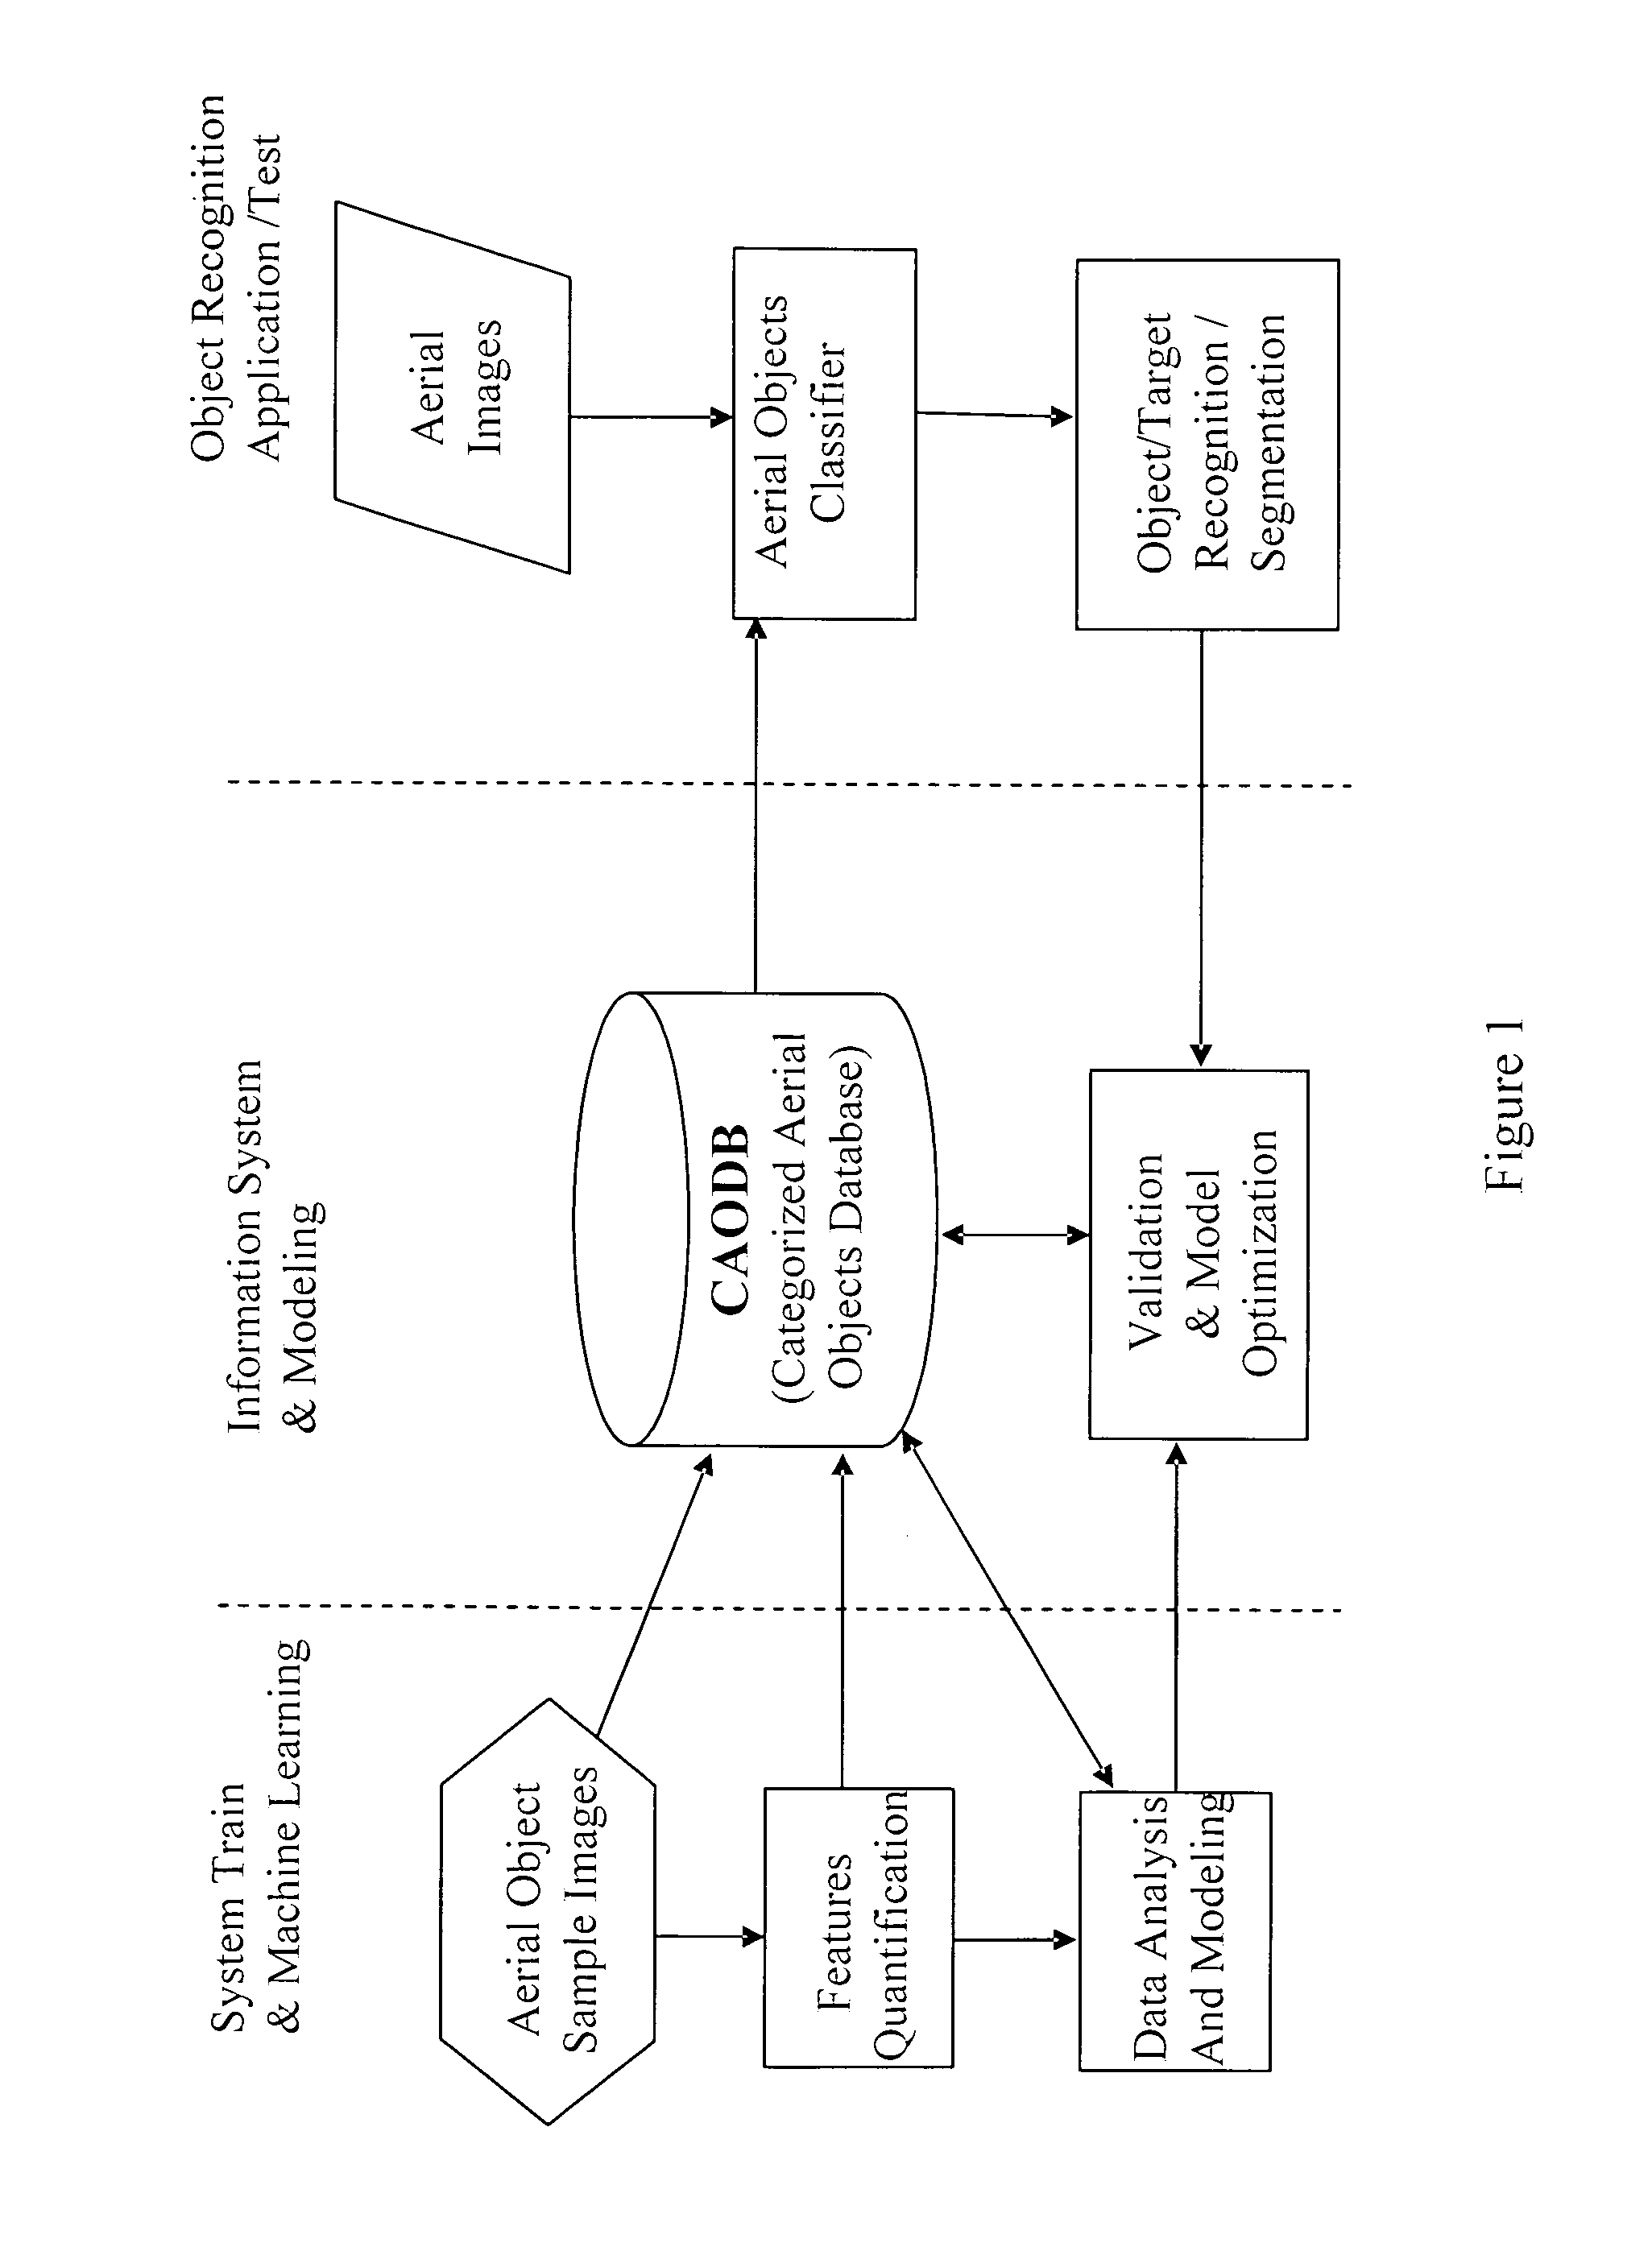 Integrated collision avoidance system for air vehicle